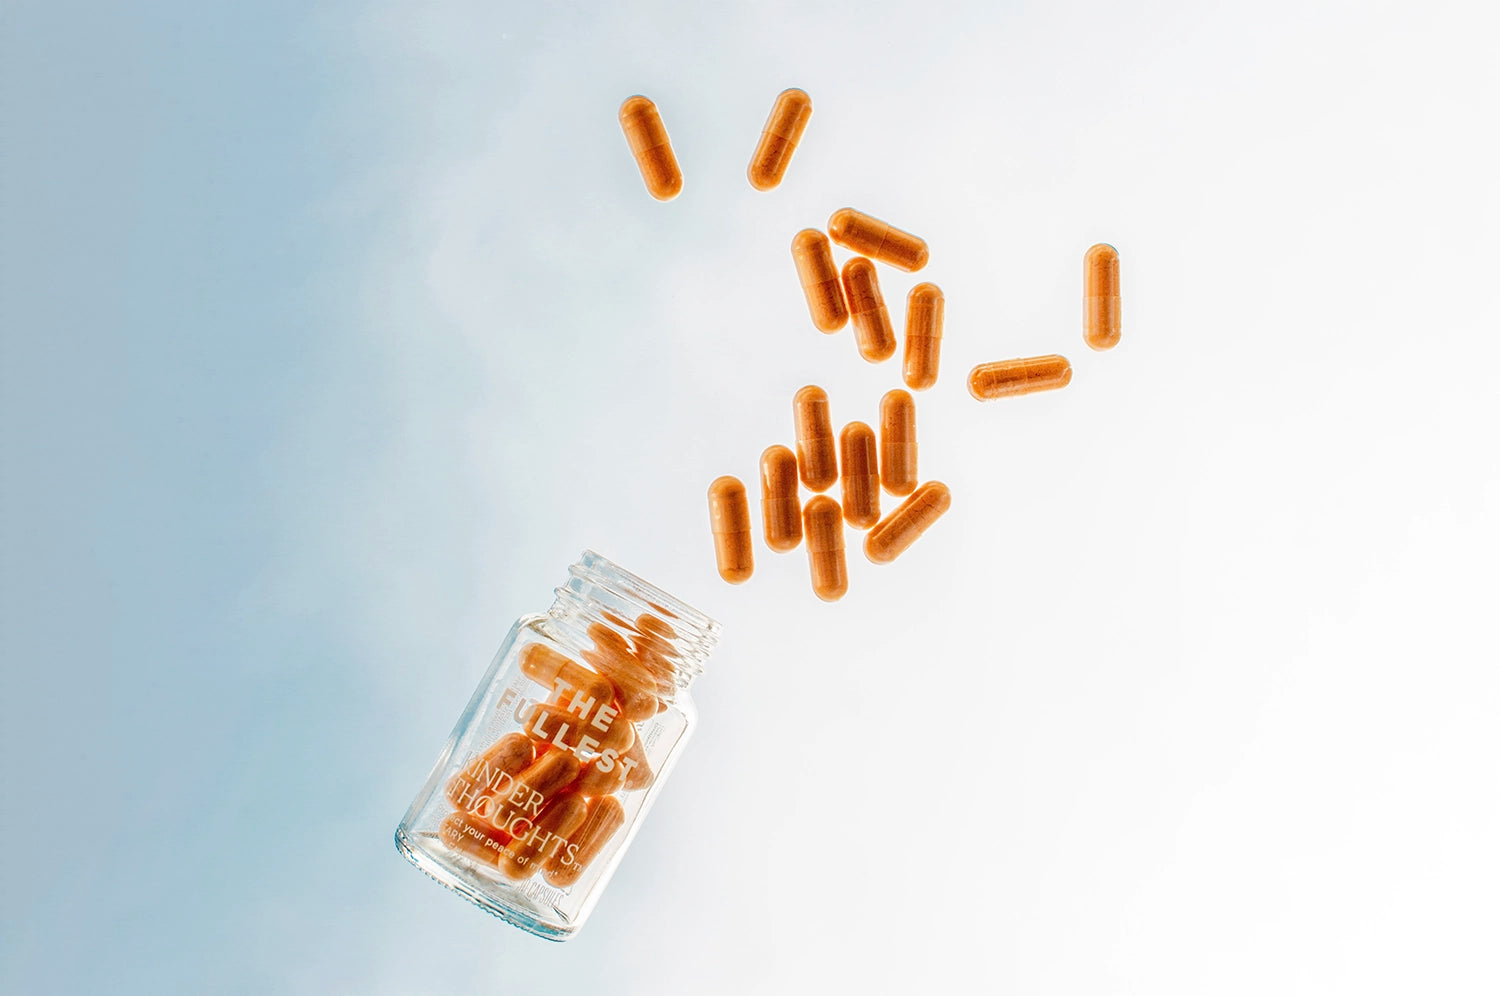 Saffron and turmeric Kinder Thoughts capsules from The Fullest spill out of a glass bottle against a bright blue sky, forming an arc above the bottle.